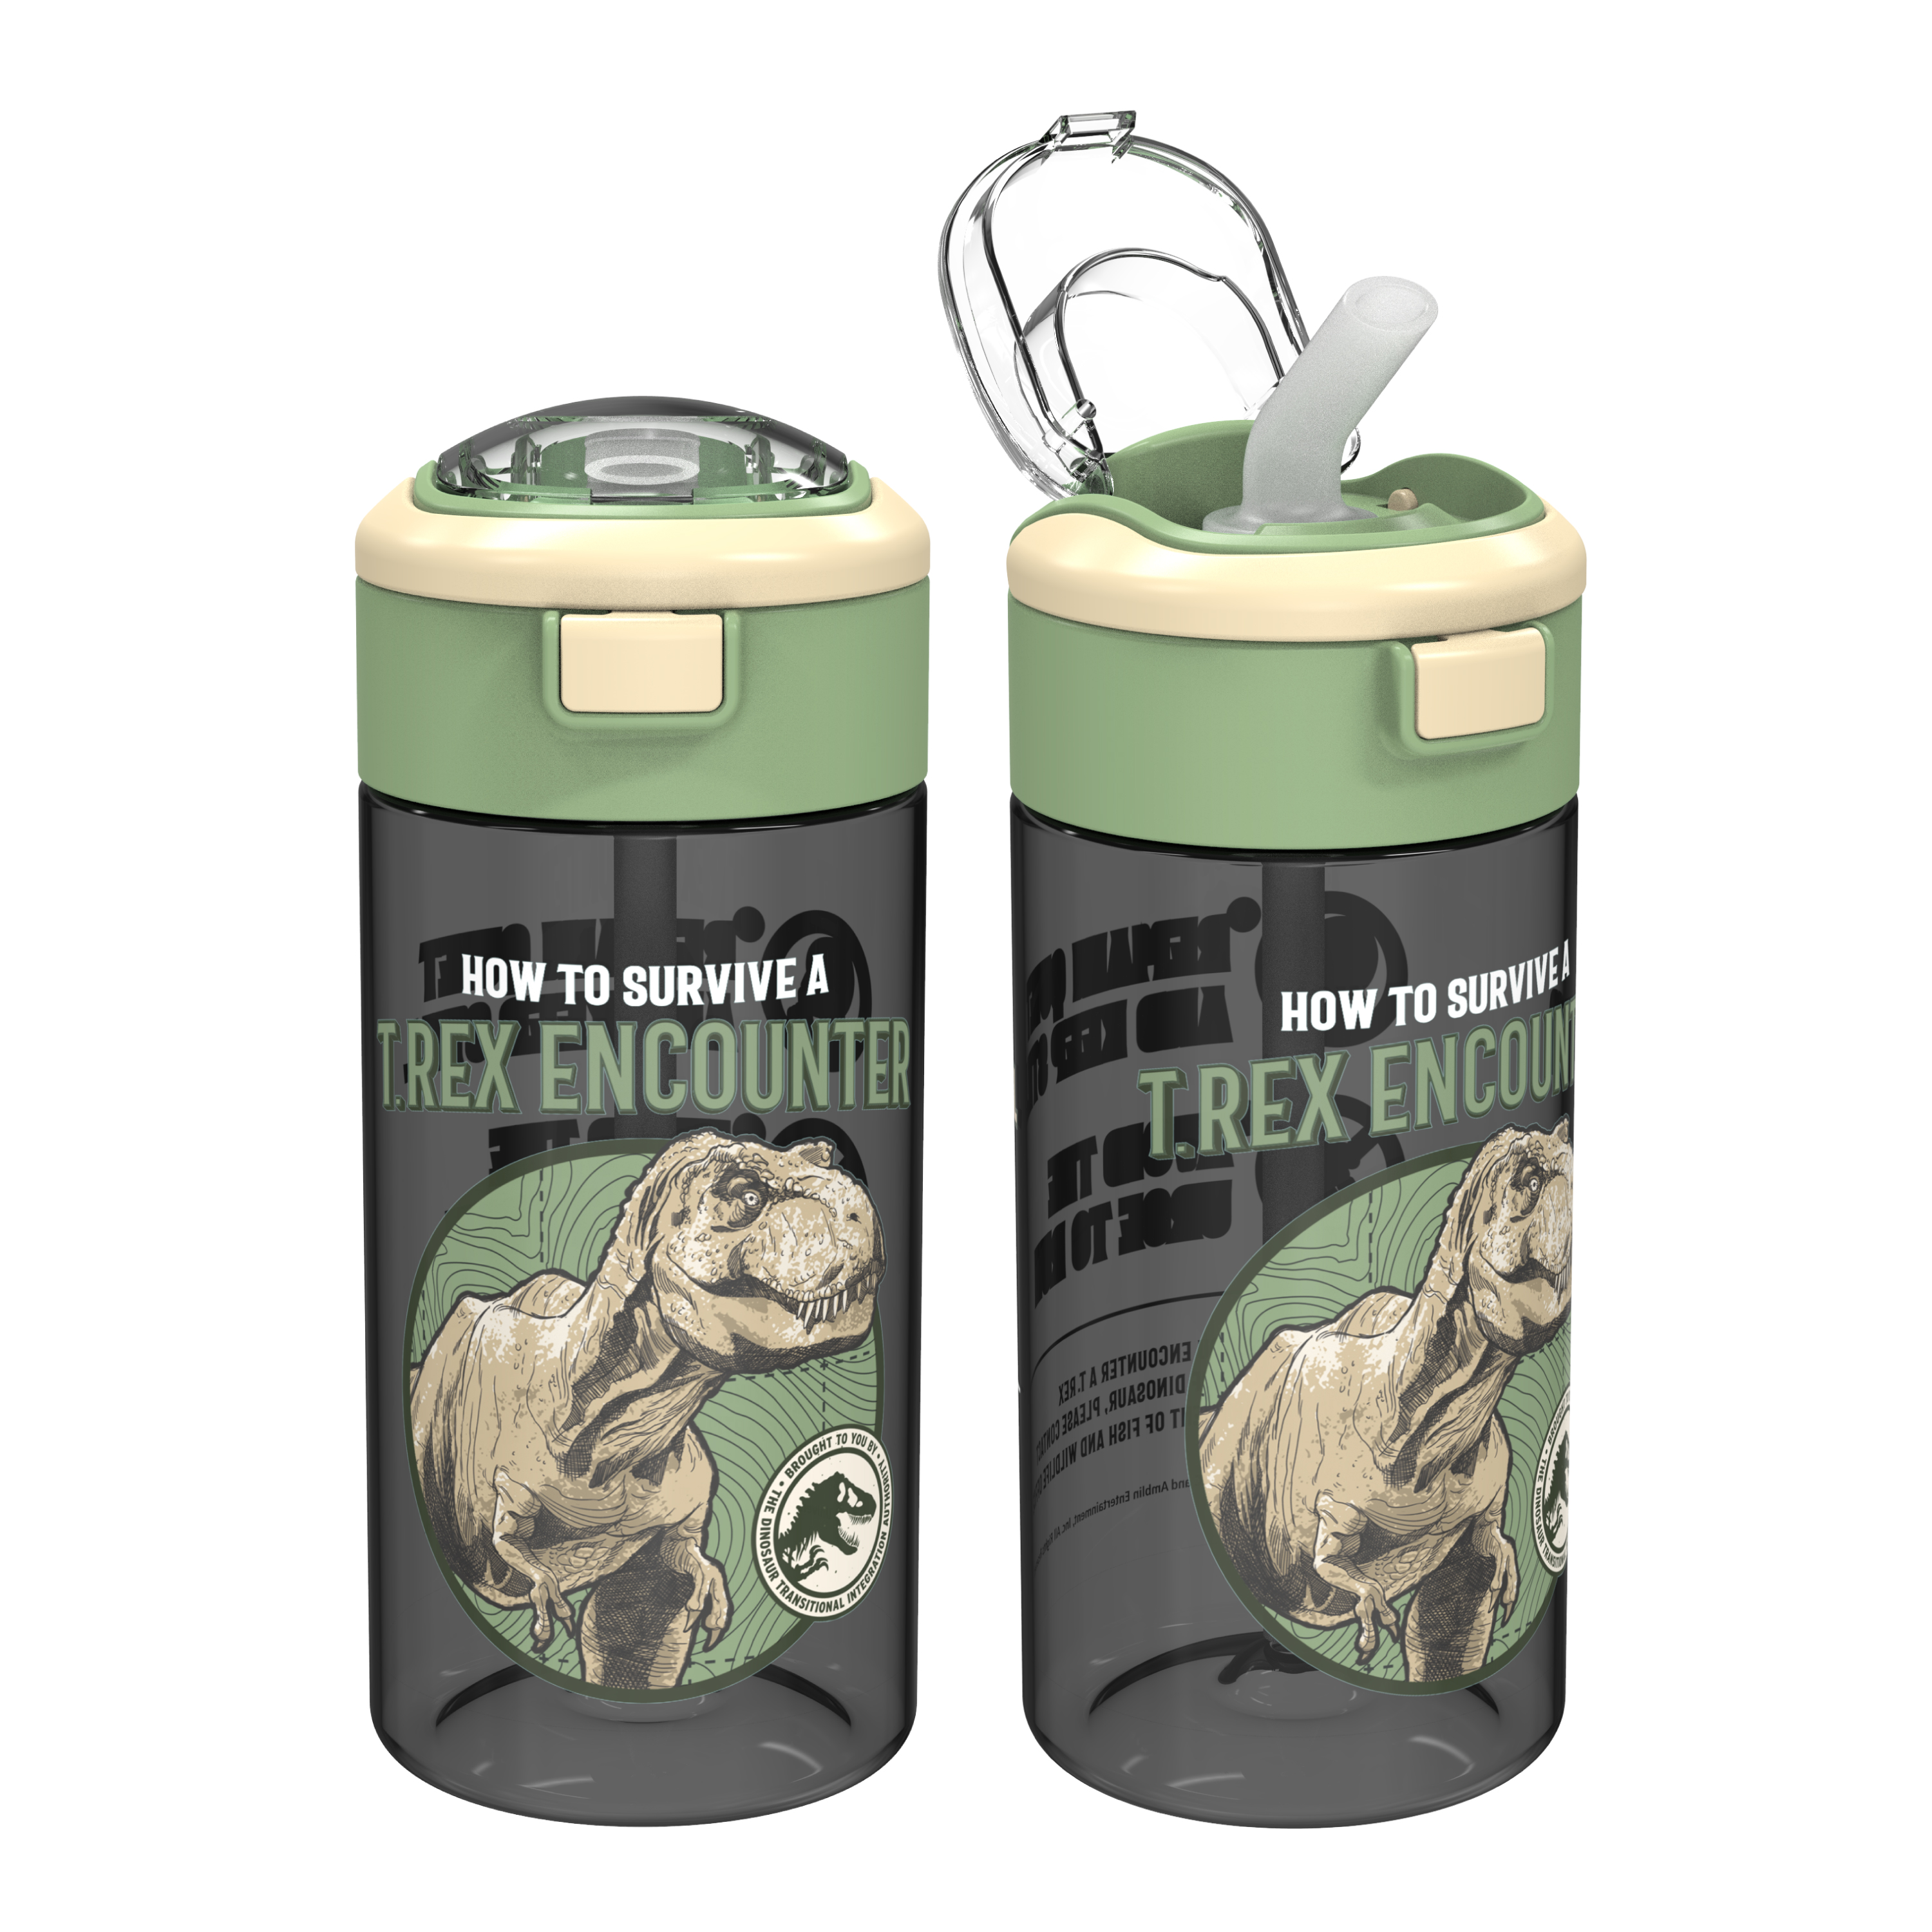 Jurassic World Dominion 18 ounce Reusable Plastic Water Bottle with Push-button lid, How to Survive a T-Rex Encounter, 2-piece set slideshow image 2